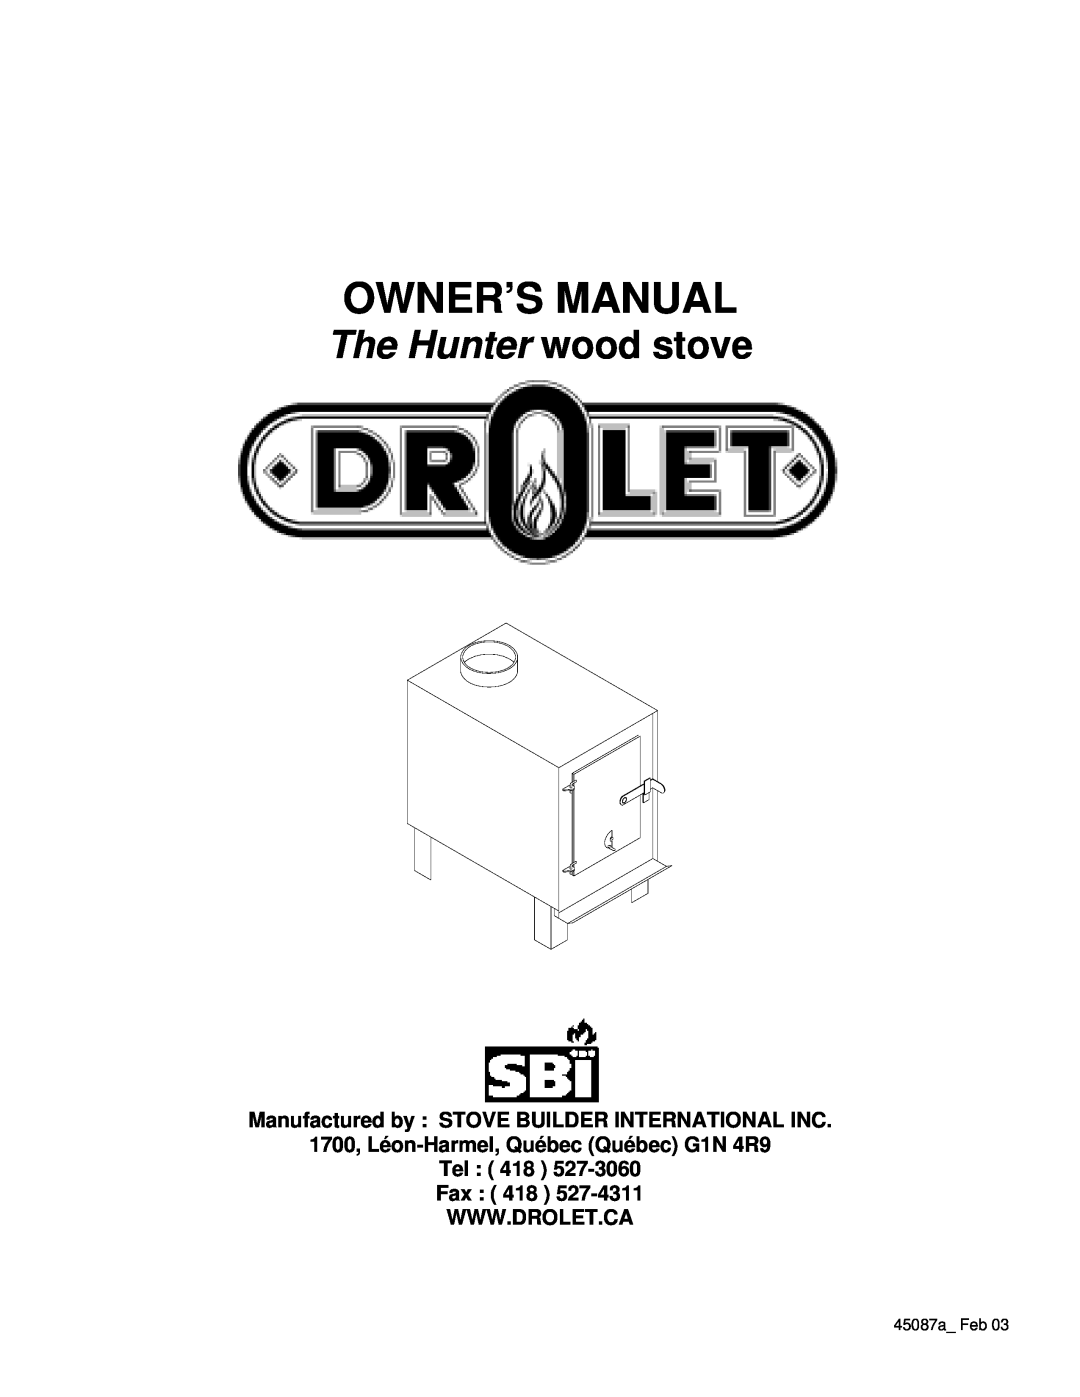 Drolet Hunter Wood Stove owner manual Manufactured by STOVE BUILDER INTERNATIONAL INC, The Hunter wood stove, 45087a Feb 